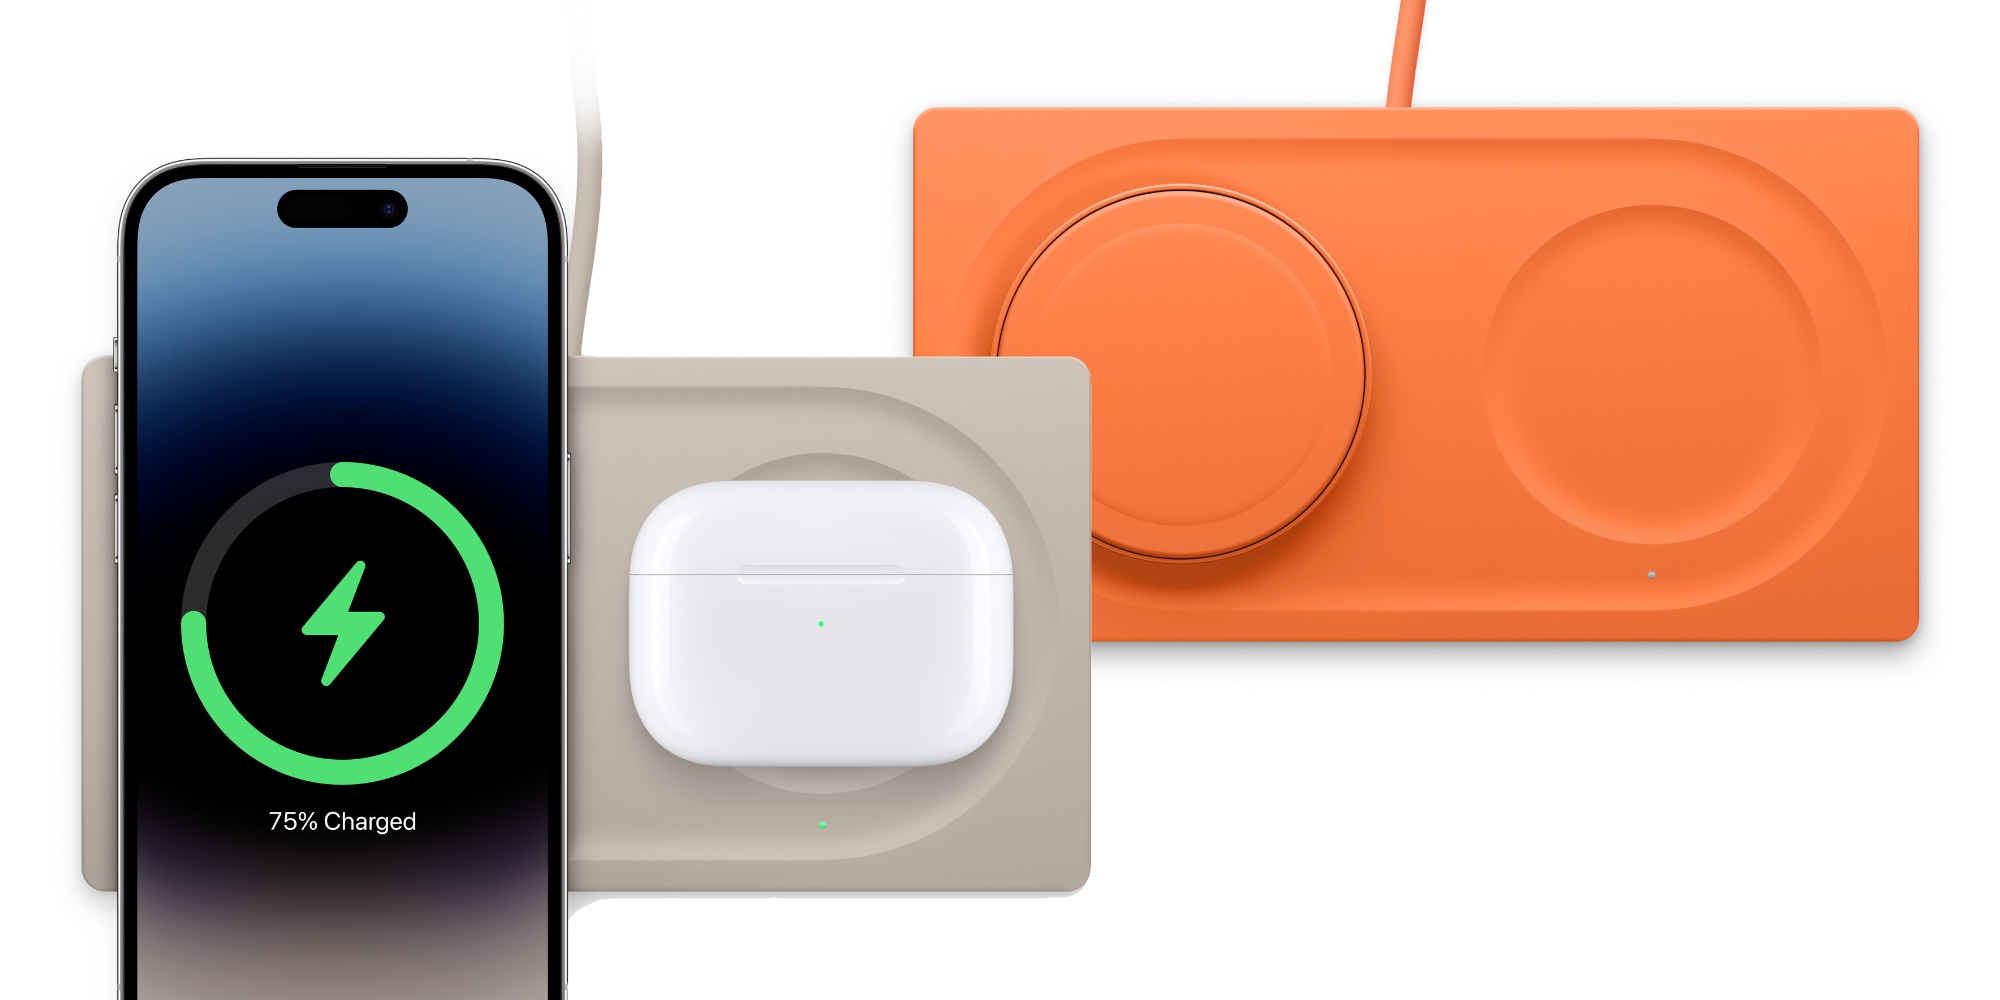 Belkin's 15W MagSafe dock is perfect for StandBy with Apple Watch fast  charging at $120